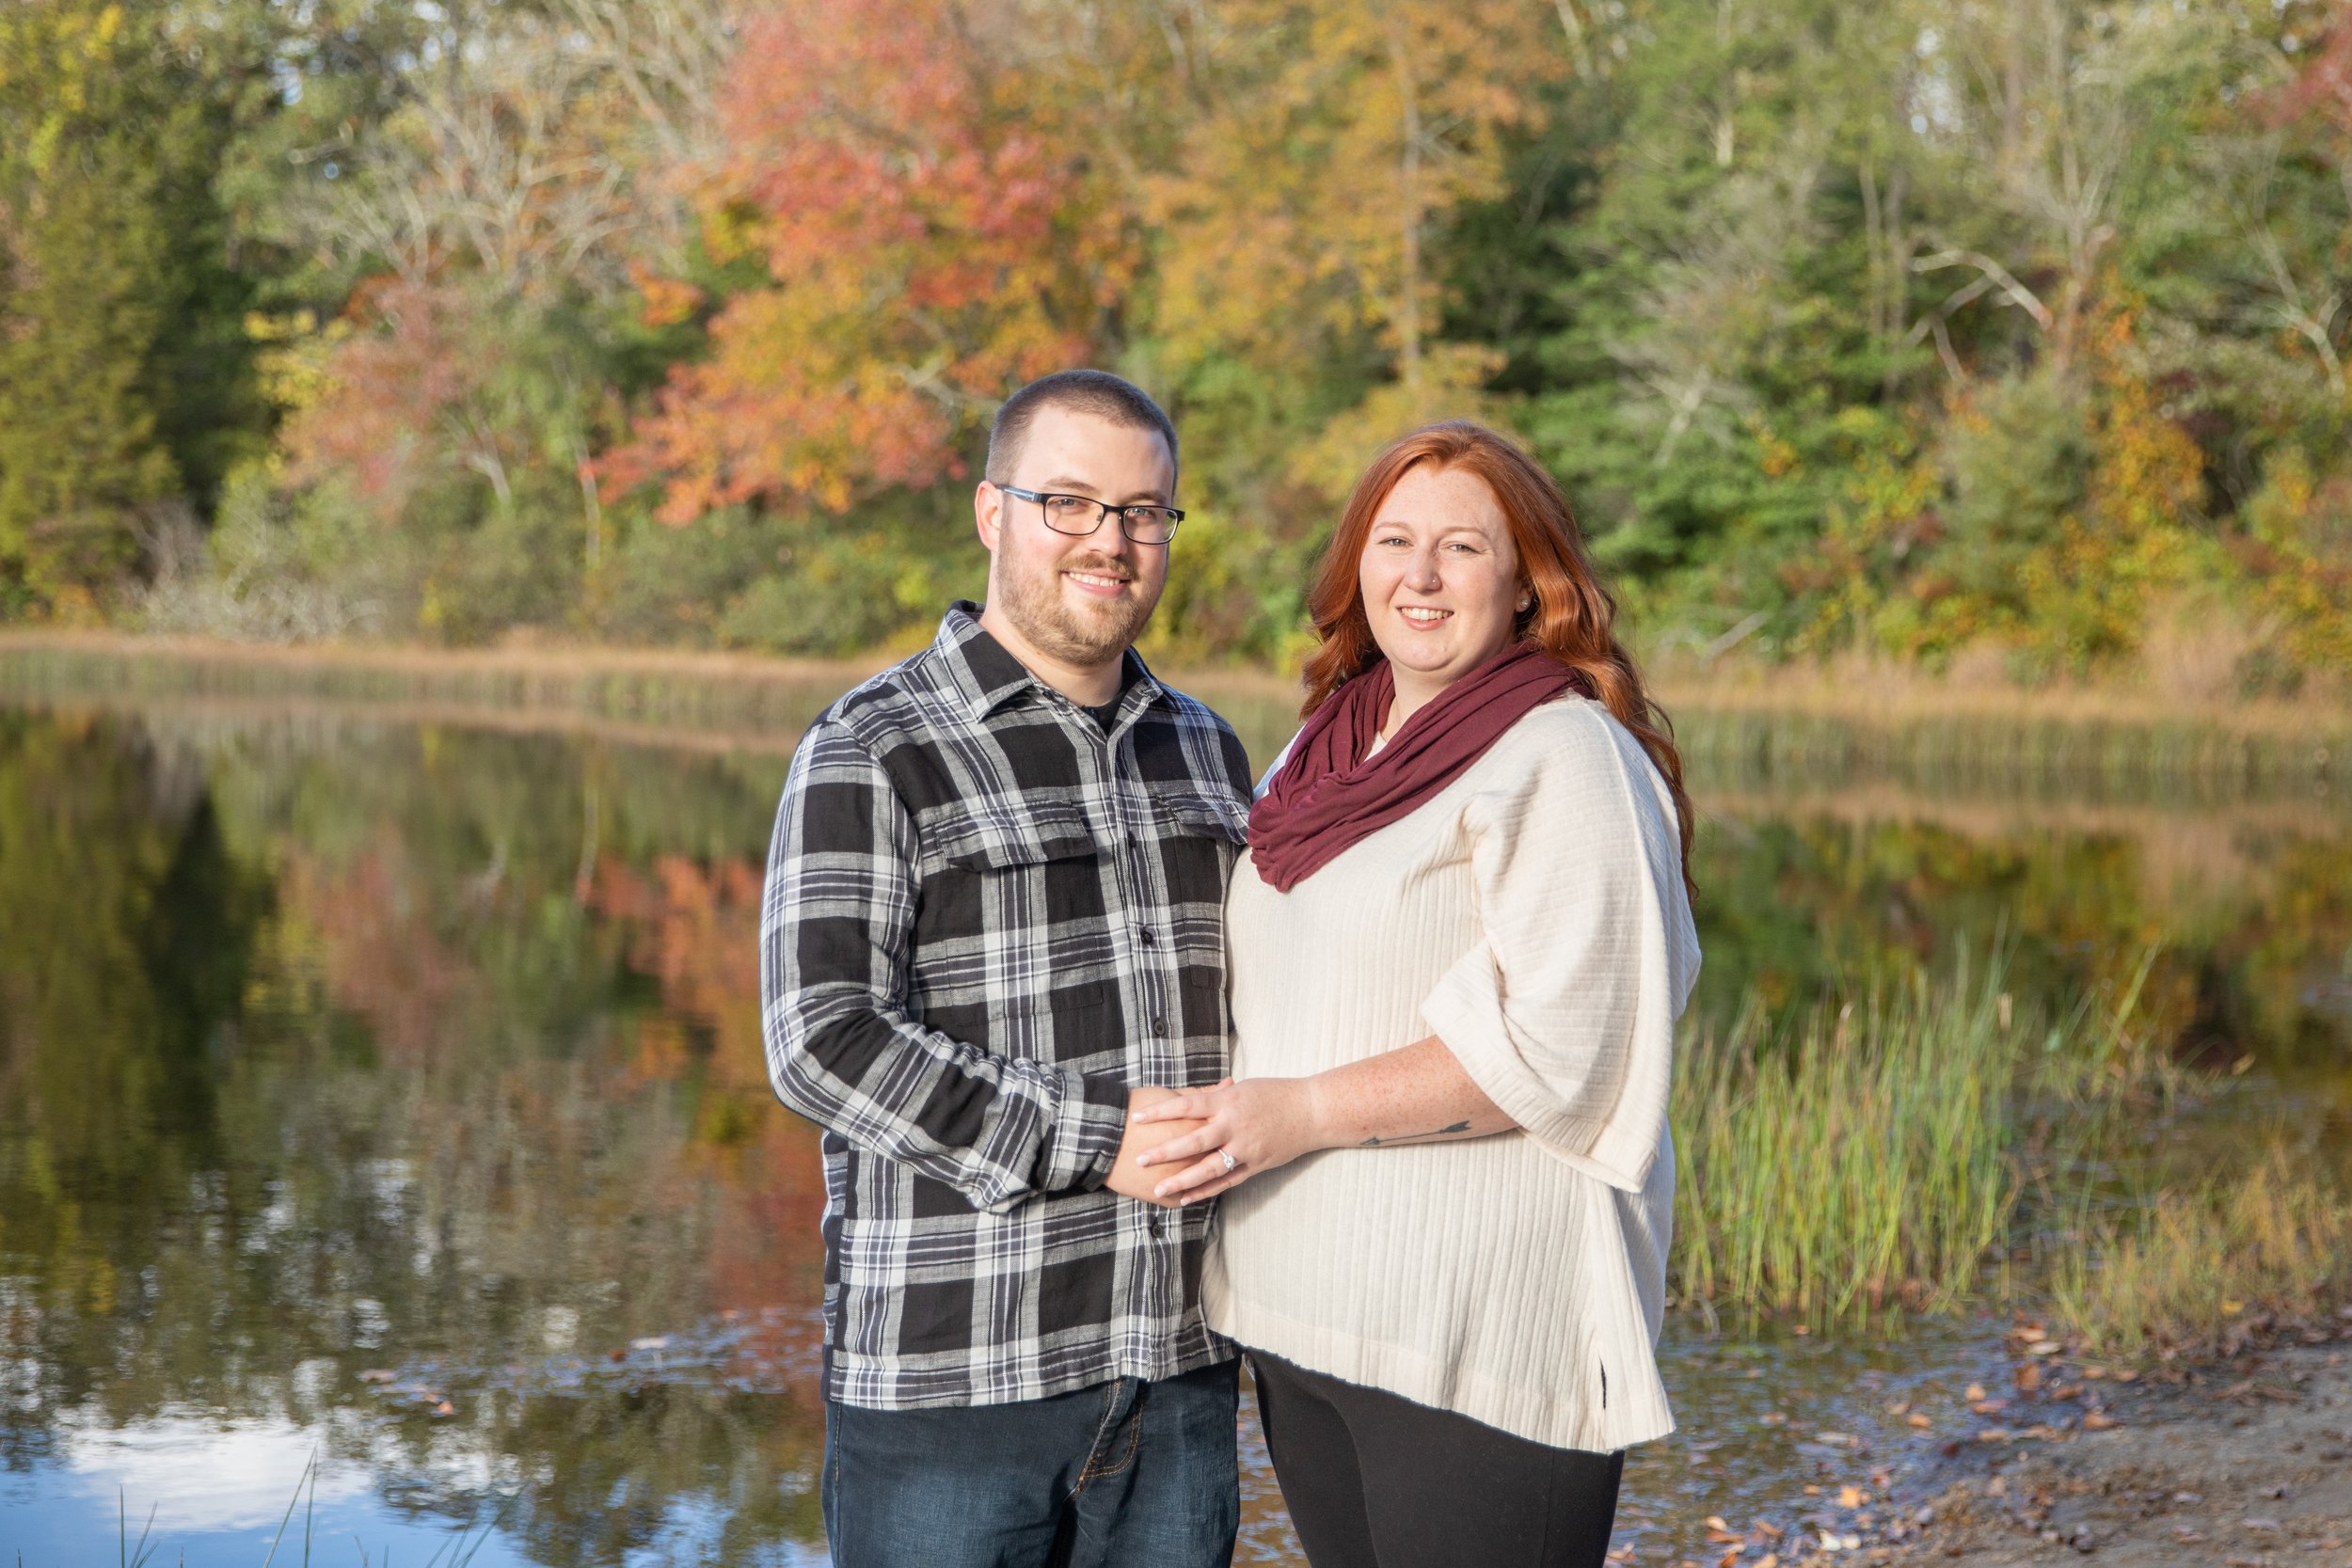 South Jersey Engagement Session - South Jersey Wedding Photography 025.jpg